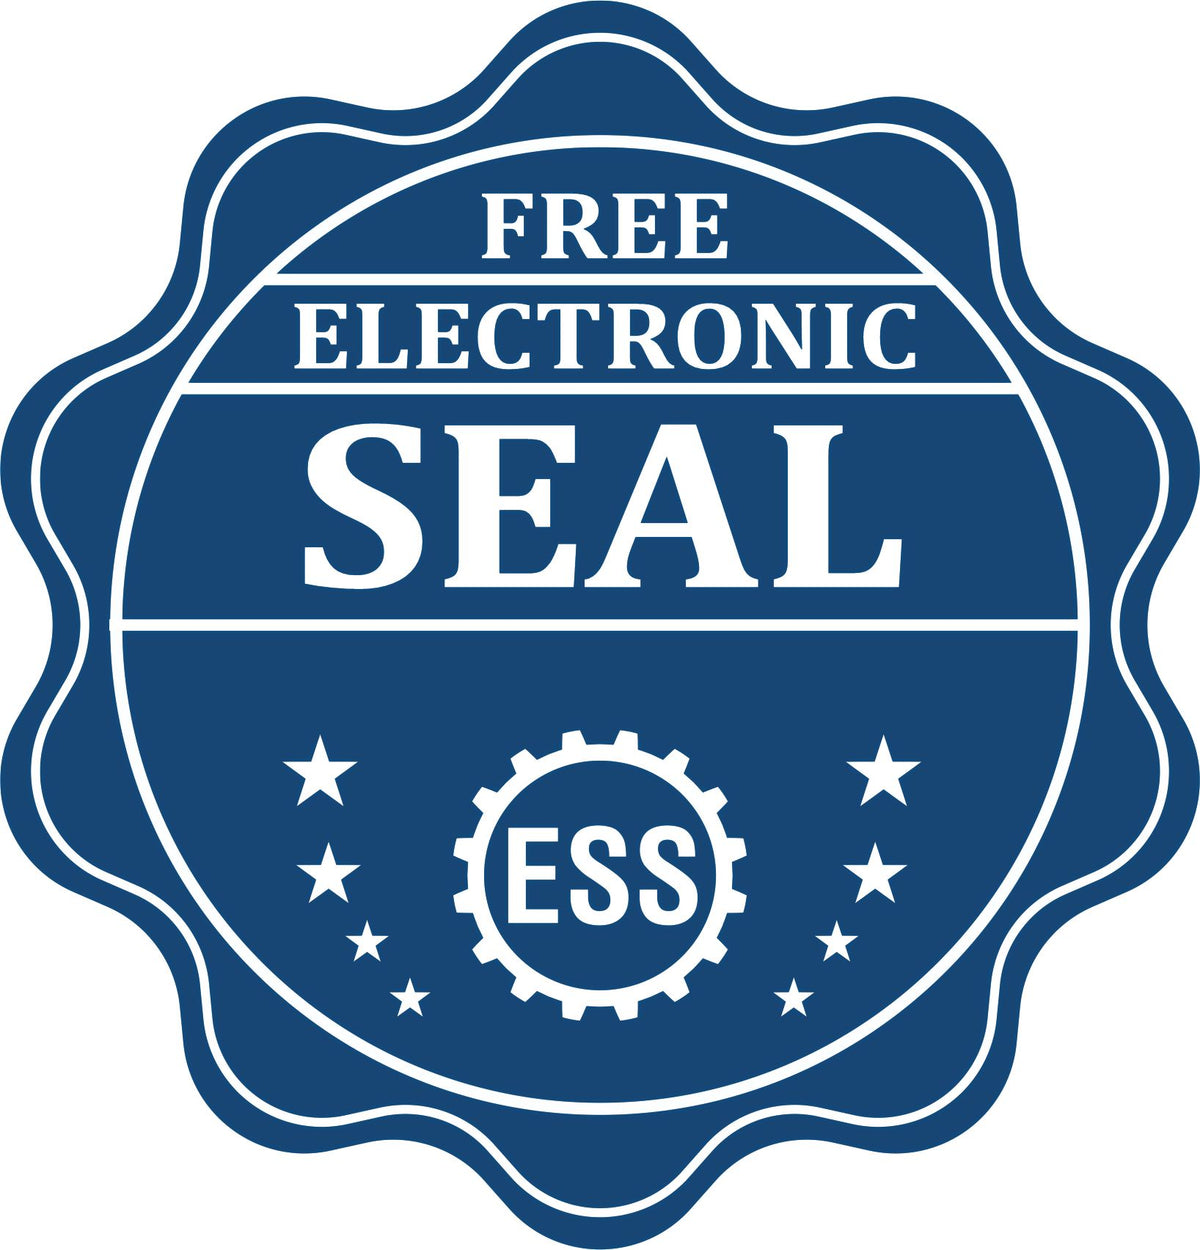 A badge showing a free electronic seal for the MaxLight Premium Pre-Inked Florida Rectangular Notarial Stamp with stars and the ESS gear on the emblem.